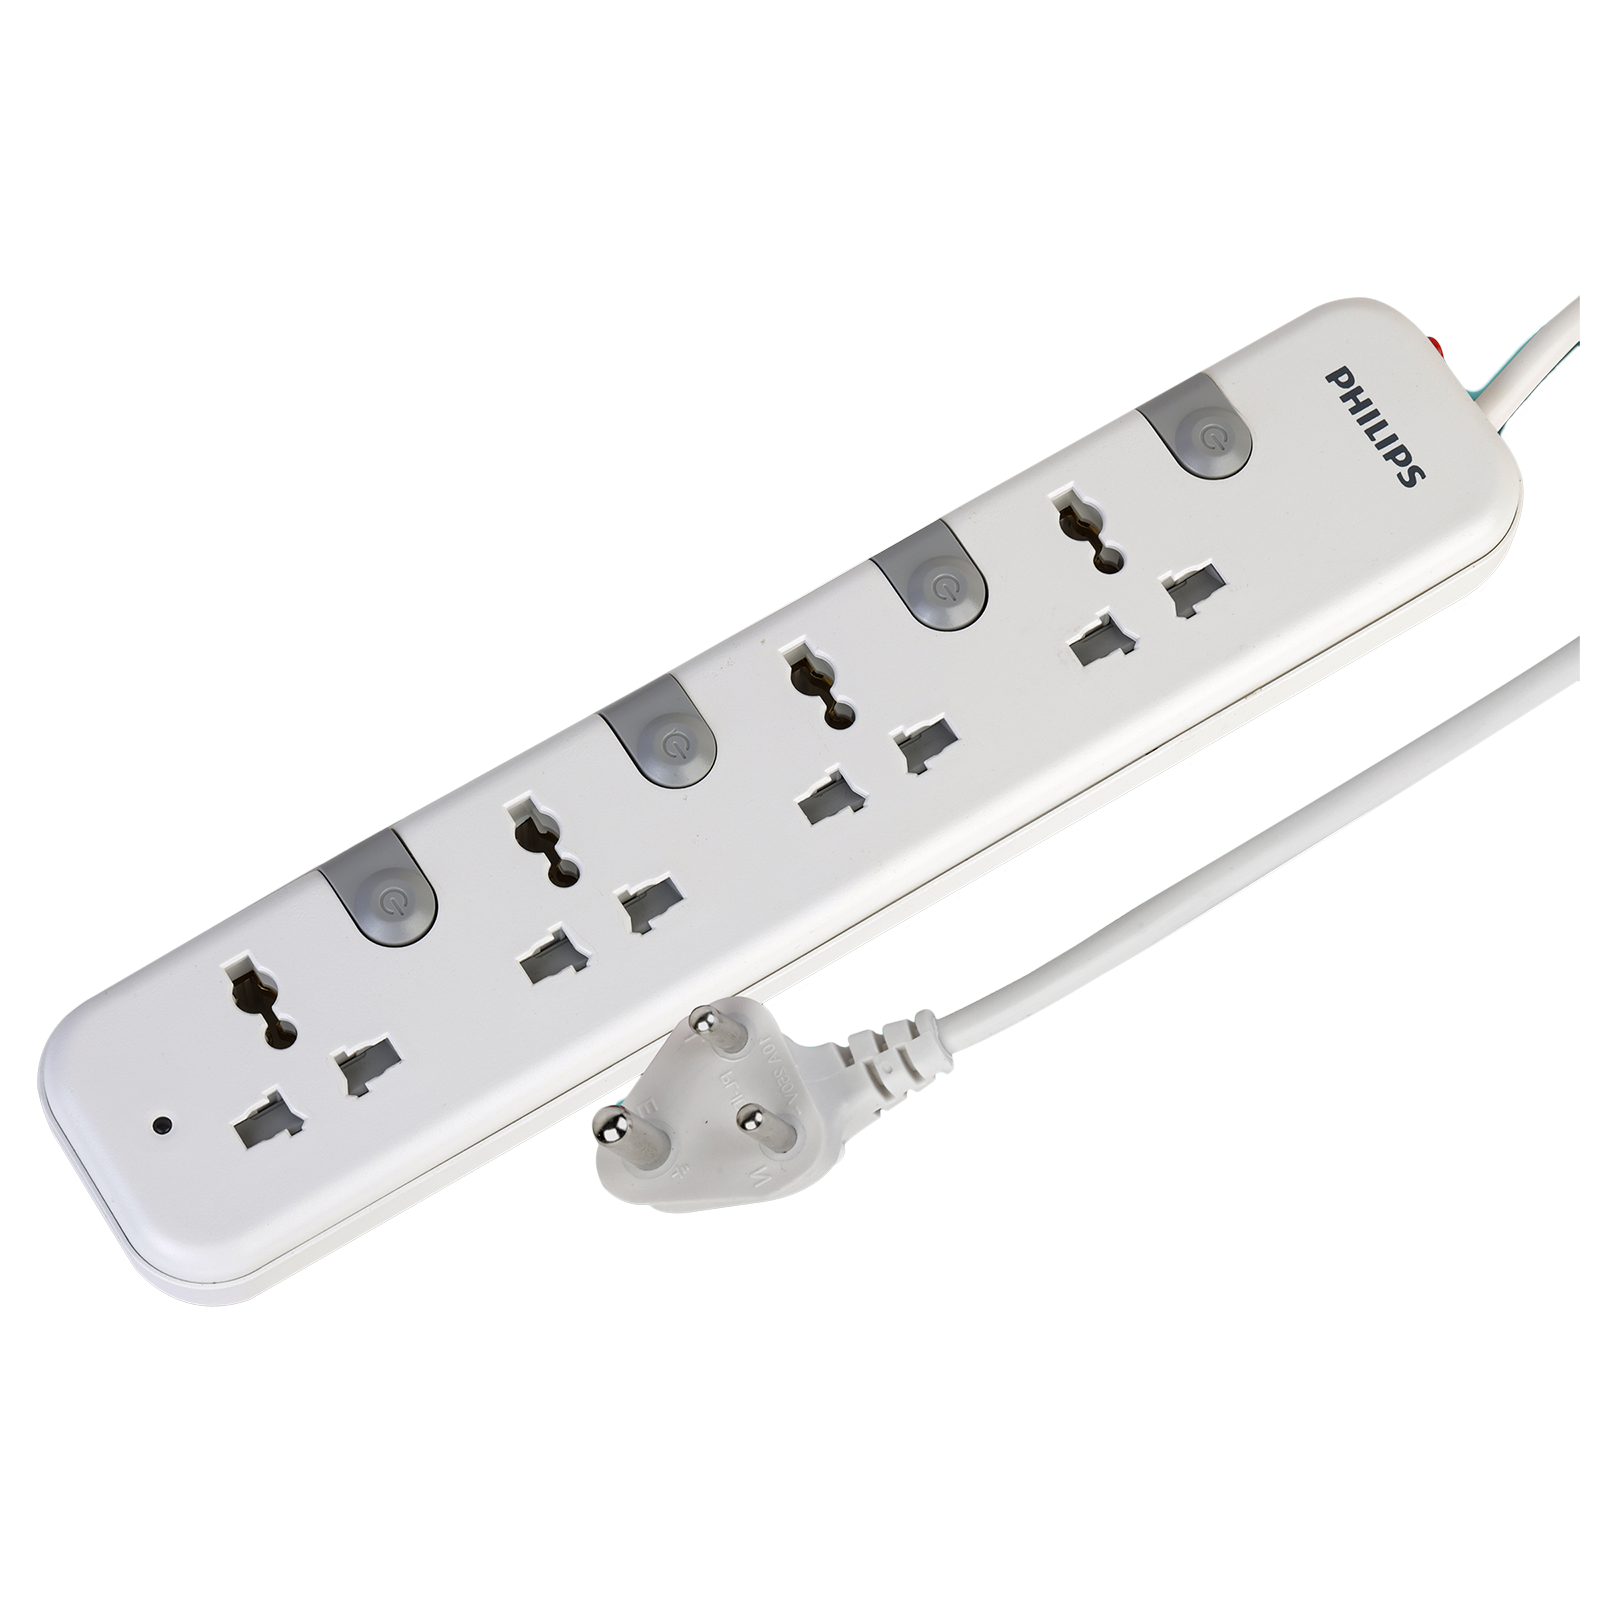 PHILIPS 10 Amps 4 Sockets Spike Guard With Individual Switch (1.4 Meters, Child Safety Shutter, CHP3441W/94, White)